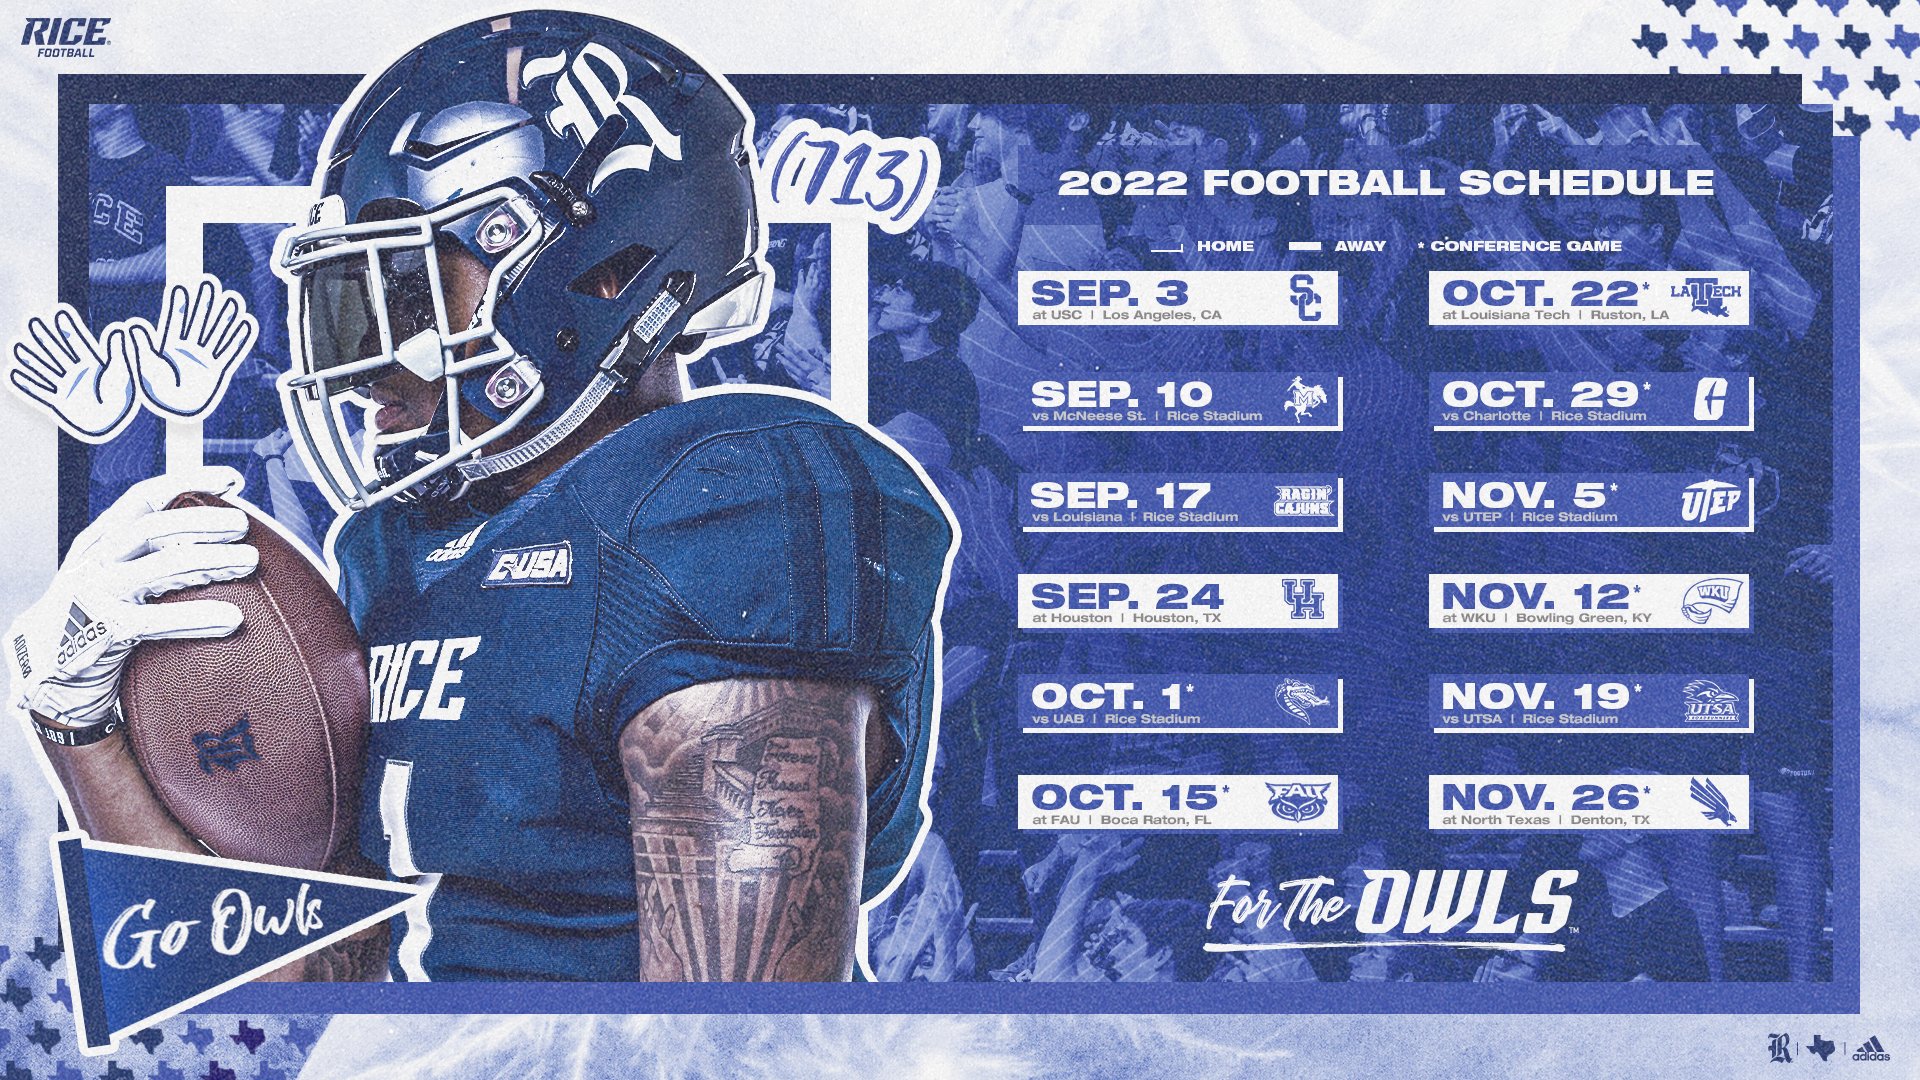 Rice Football on Twitter: "Here's our schedule to download and save! https://t.co/5TI9rl4OAZ